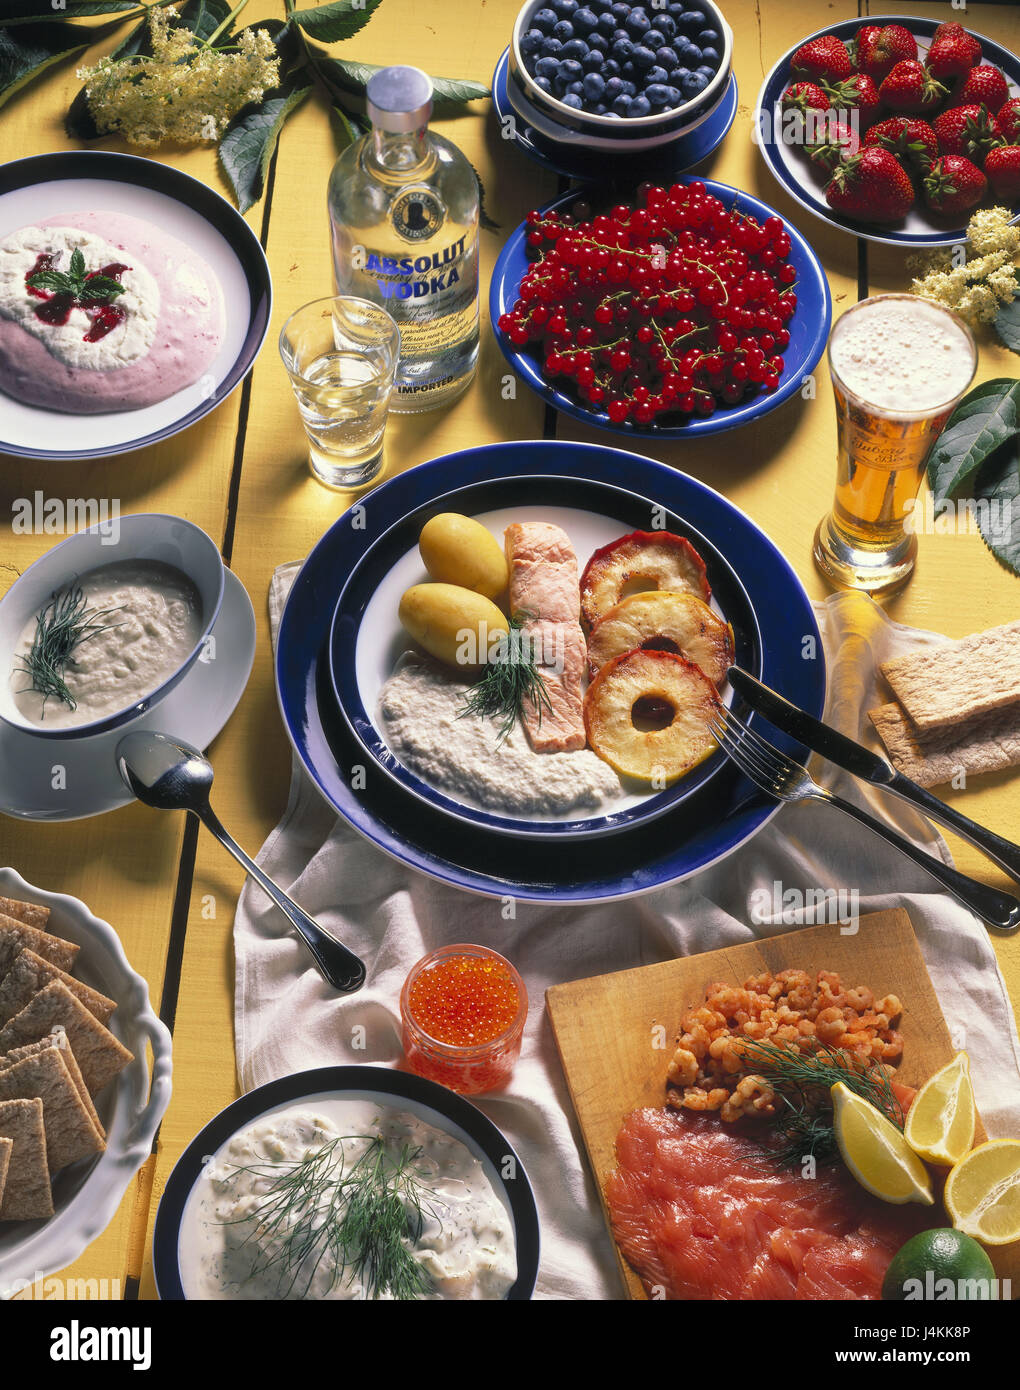 Dishes, drinks, in Swedish, specialities still life, object photography, foods, food, fish dishes, fish, salmon, shrimps, cranberries, fruit, par bailiff, dessert, main meal, hors-d'oeuvre, caviar, vodka, beer, alcohol, alcoholic Stock Photo